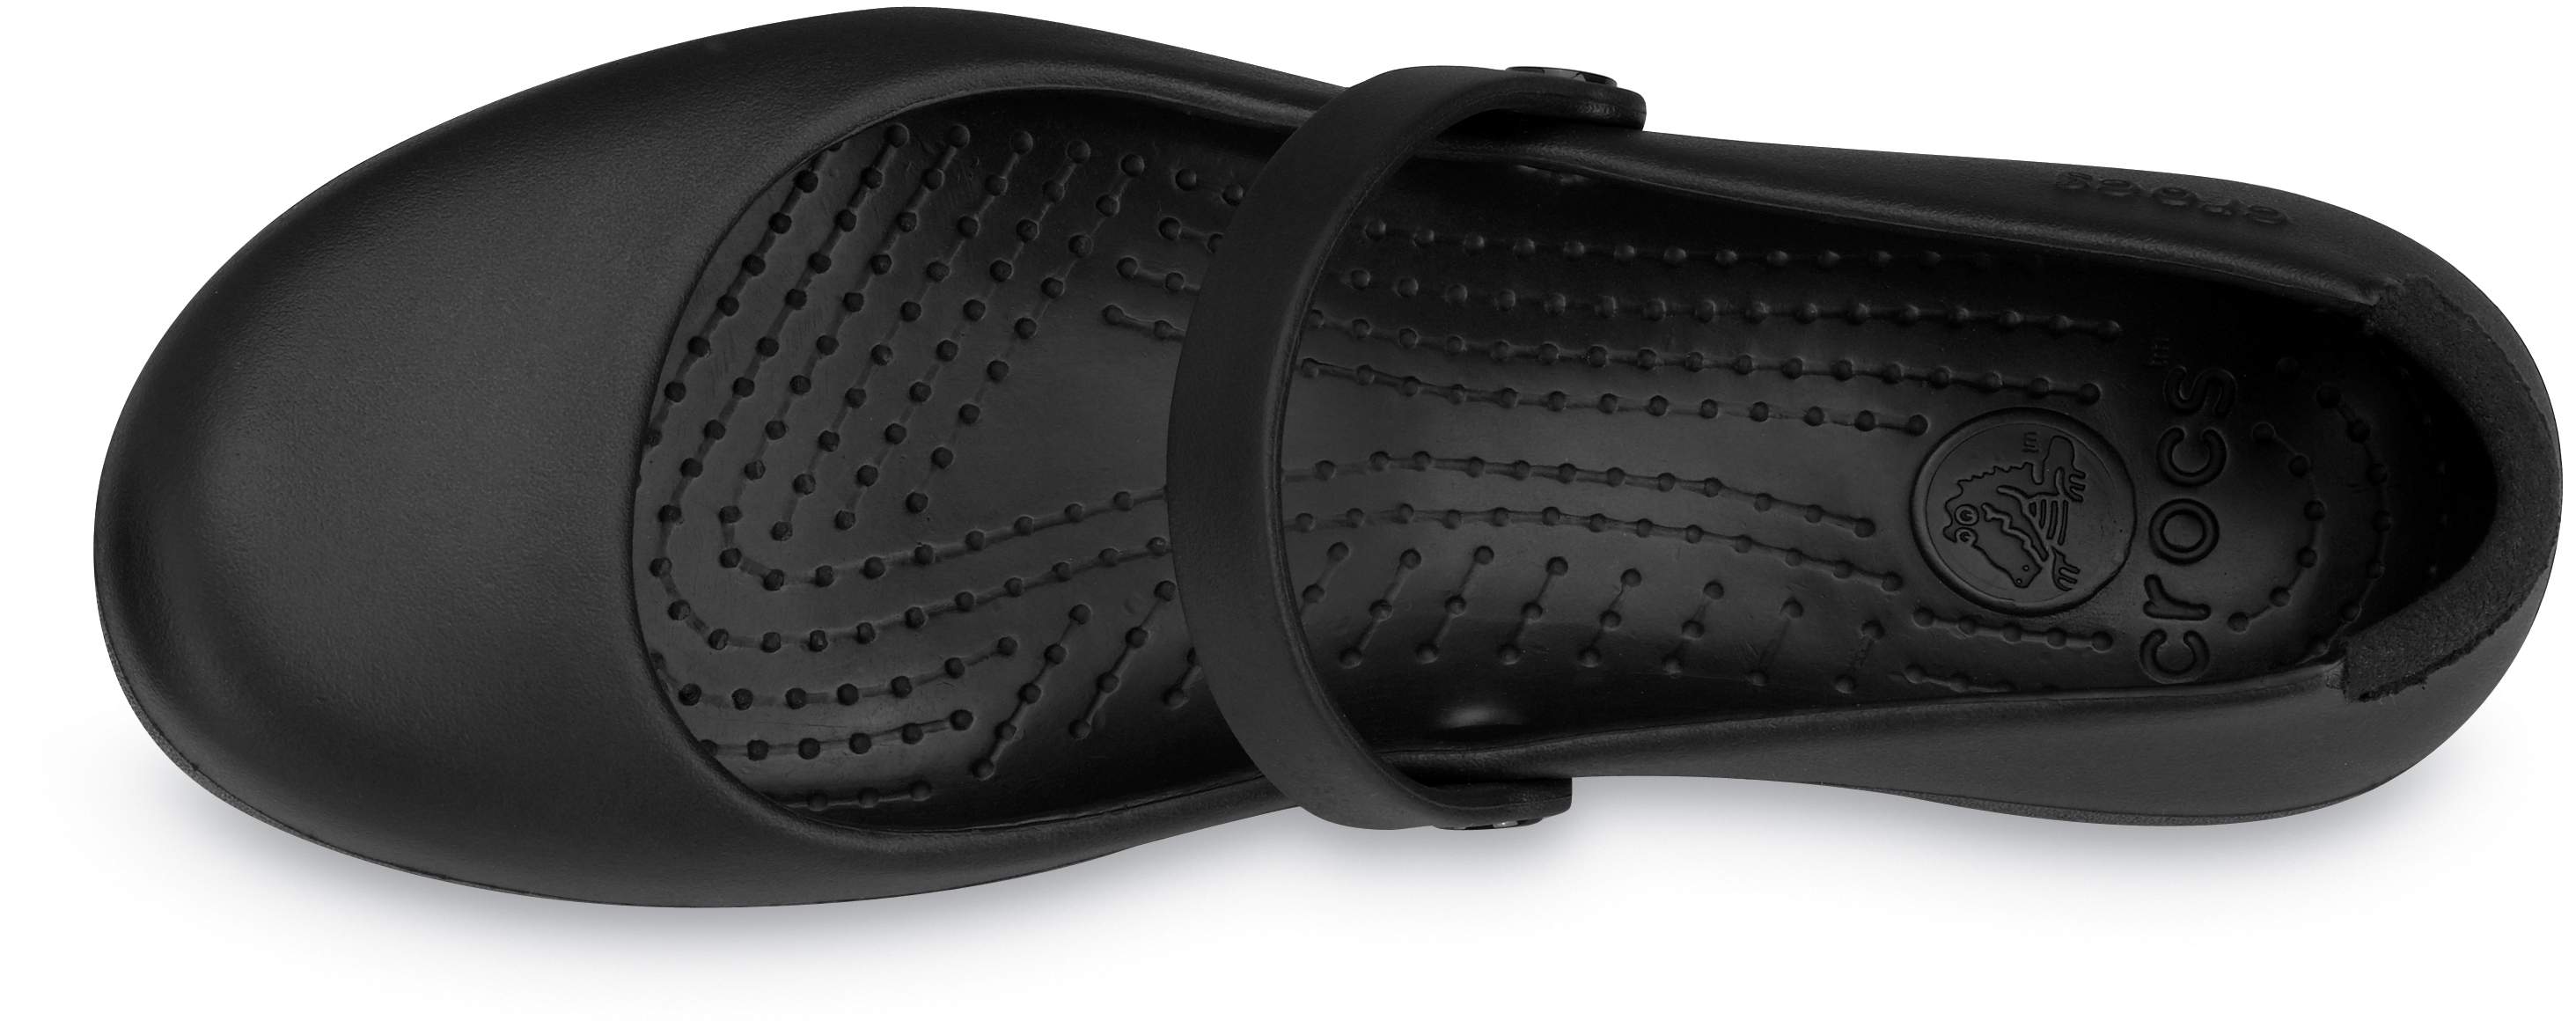 crocs alice work shoes review